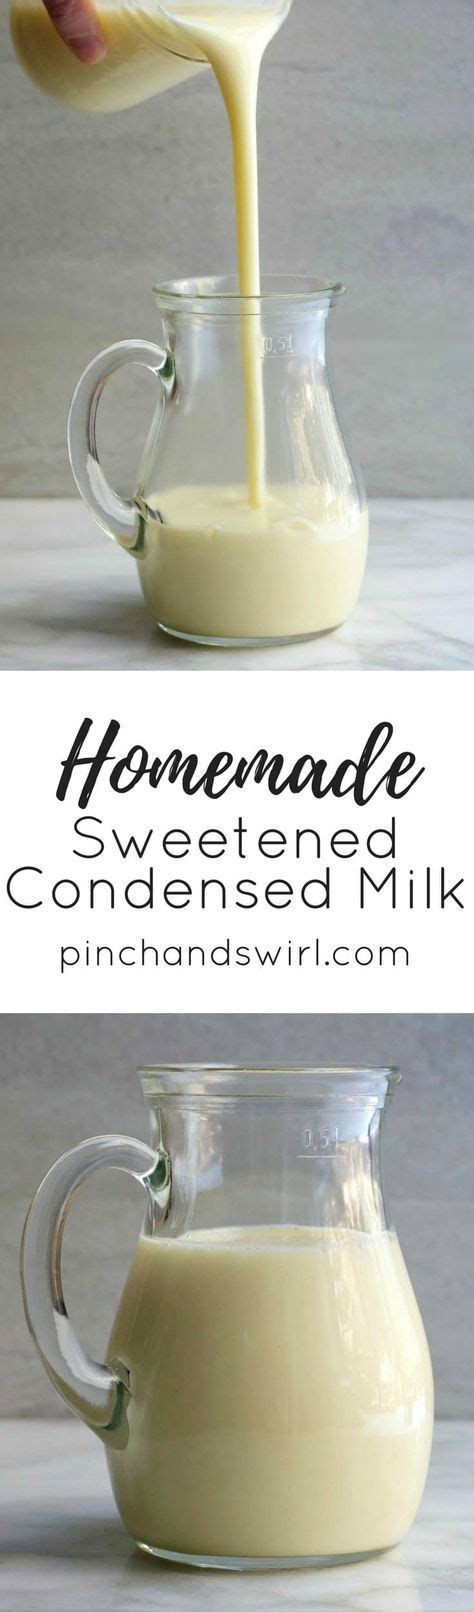 It's especially impressive when made in a tall glass bowl so all your guests can see the layers. Make Sweetened Condensed Milk at home with just a few simple ingredients. It's easy and tas ...